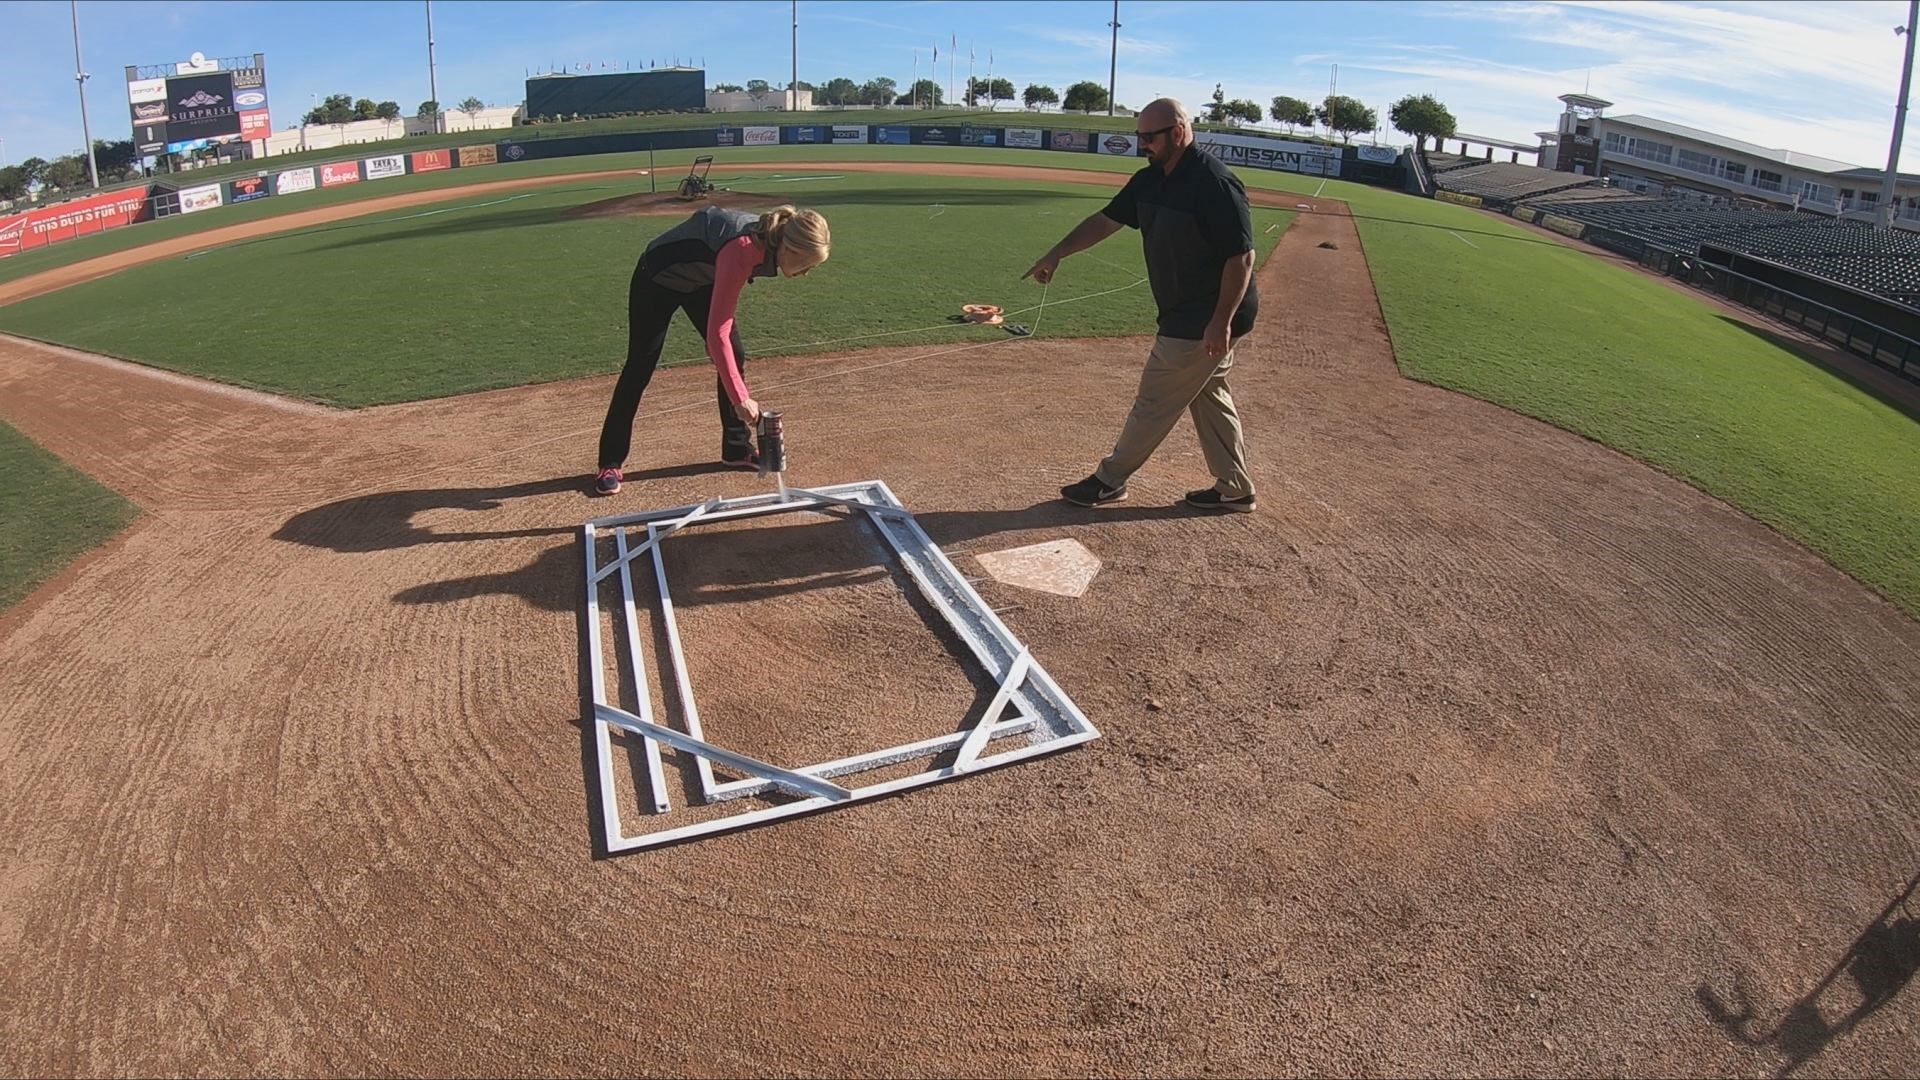 We get a first-hand look at what it really takes to keep the Surprise Stadium in tip-top shape all year round.